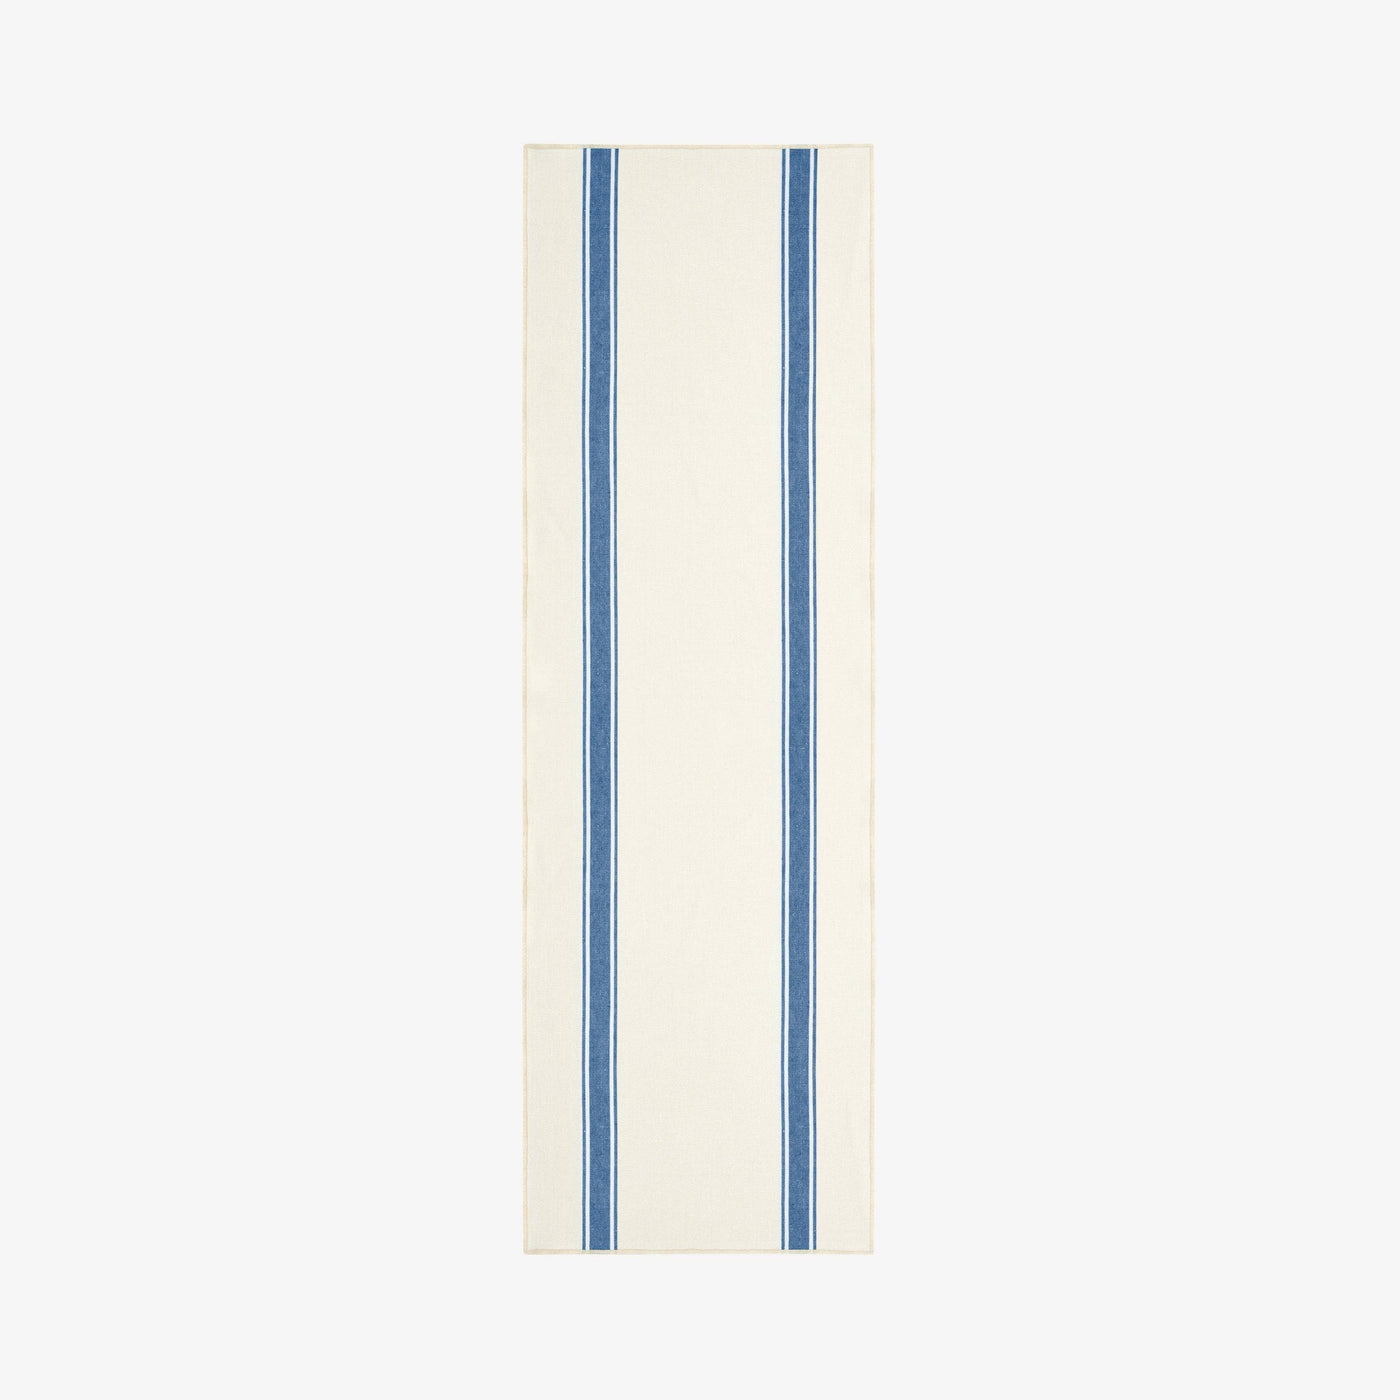 Mary Striped Runner, Natural - Blue, 46x150 cm 1